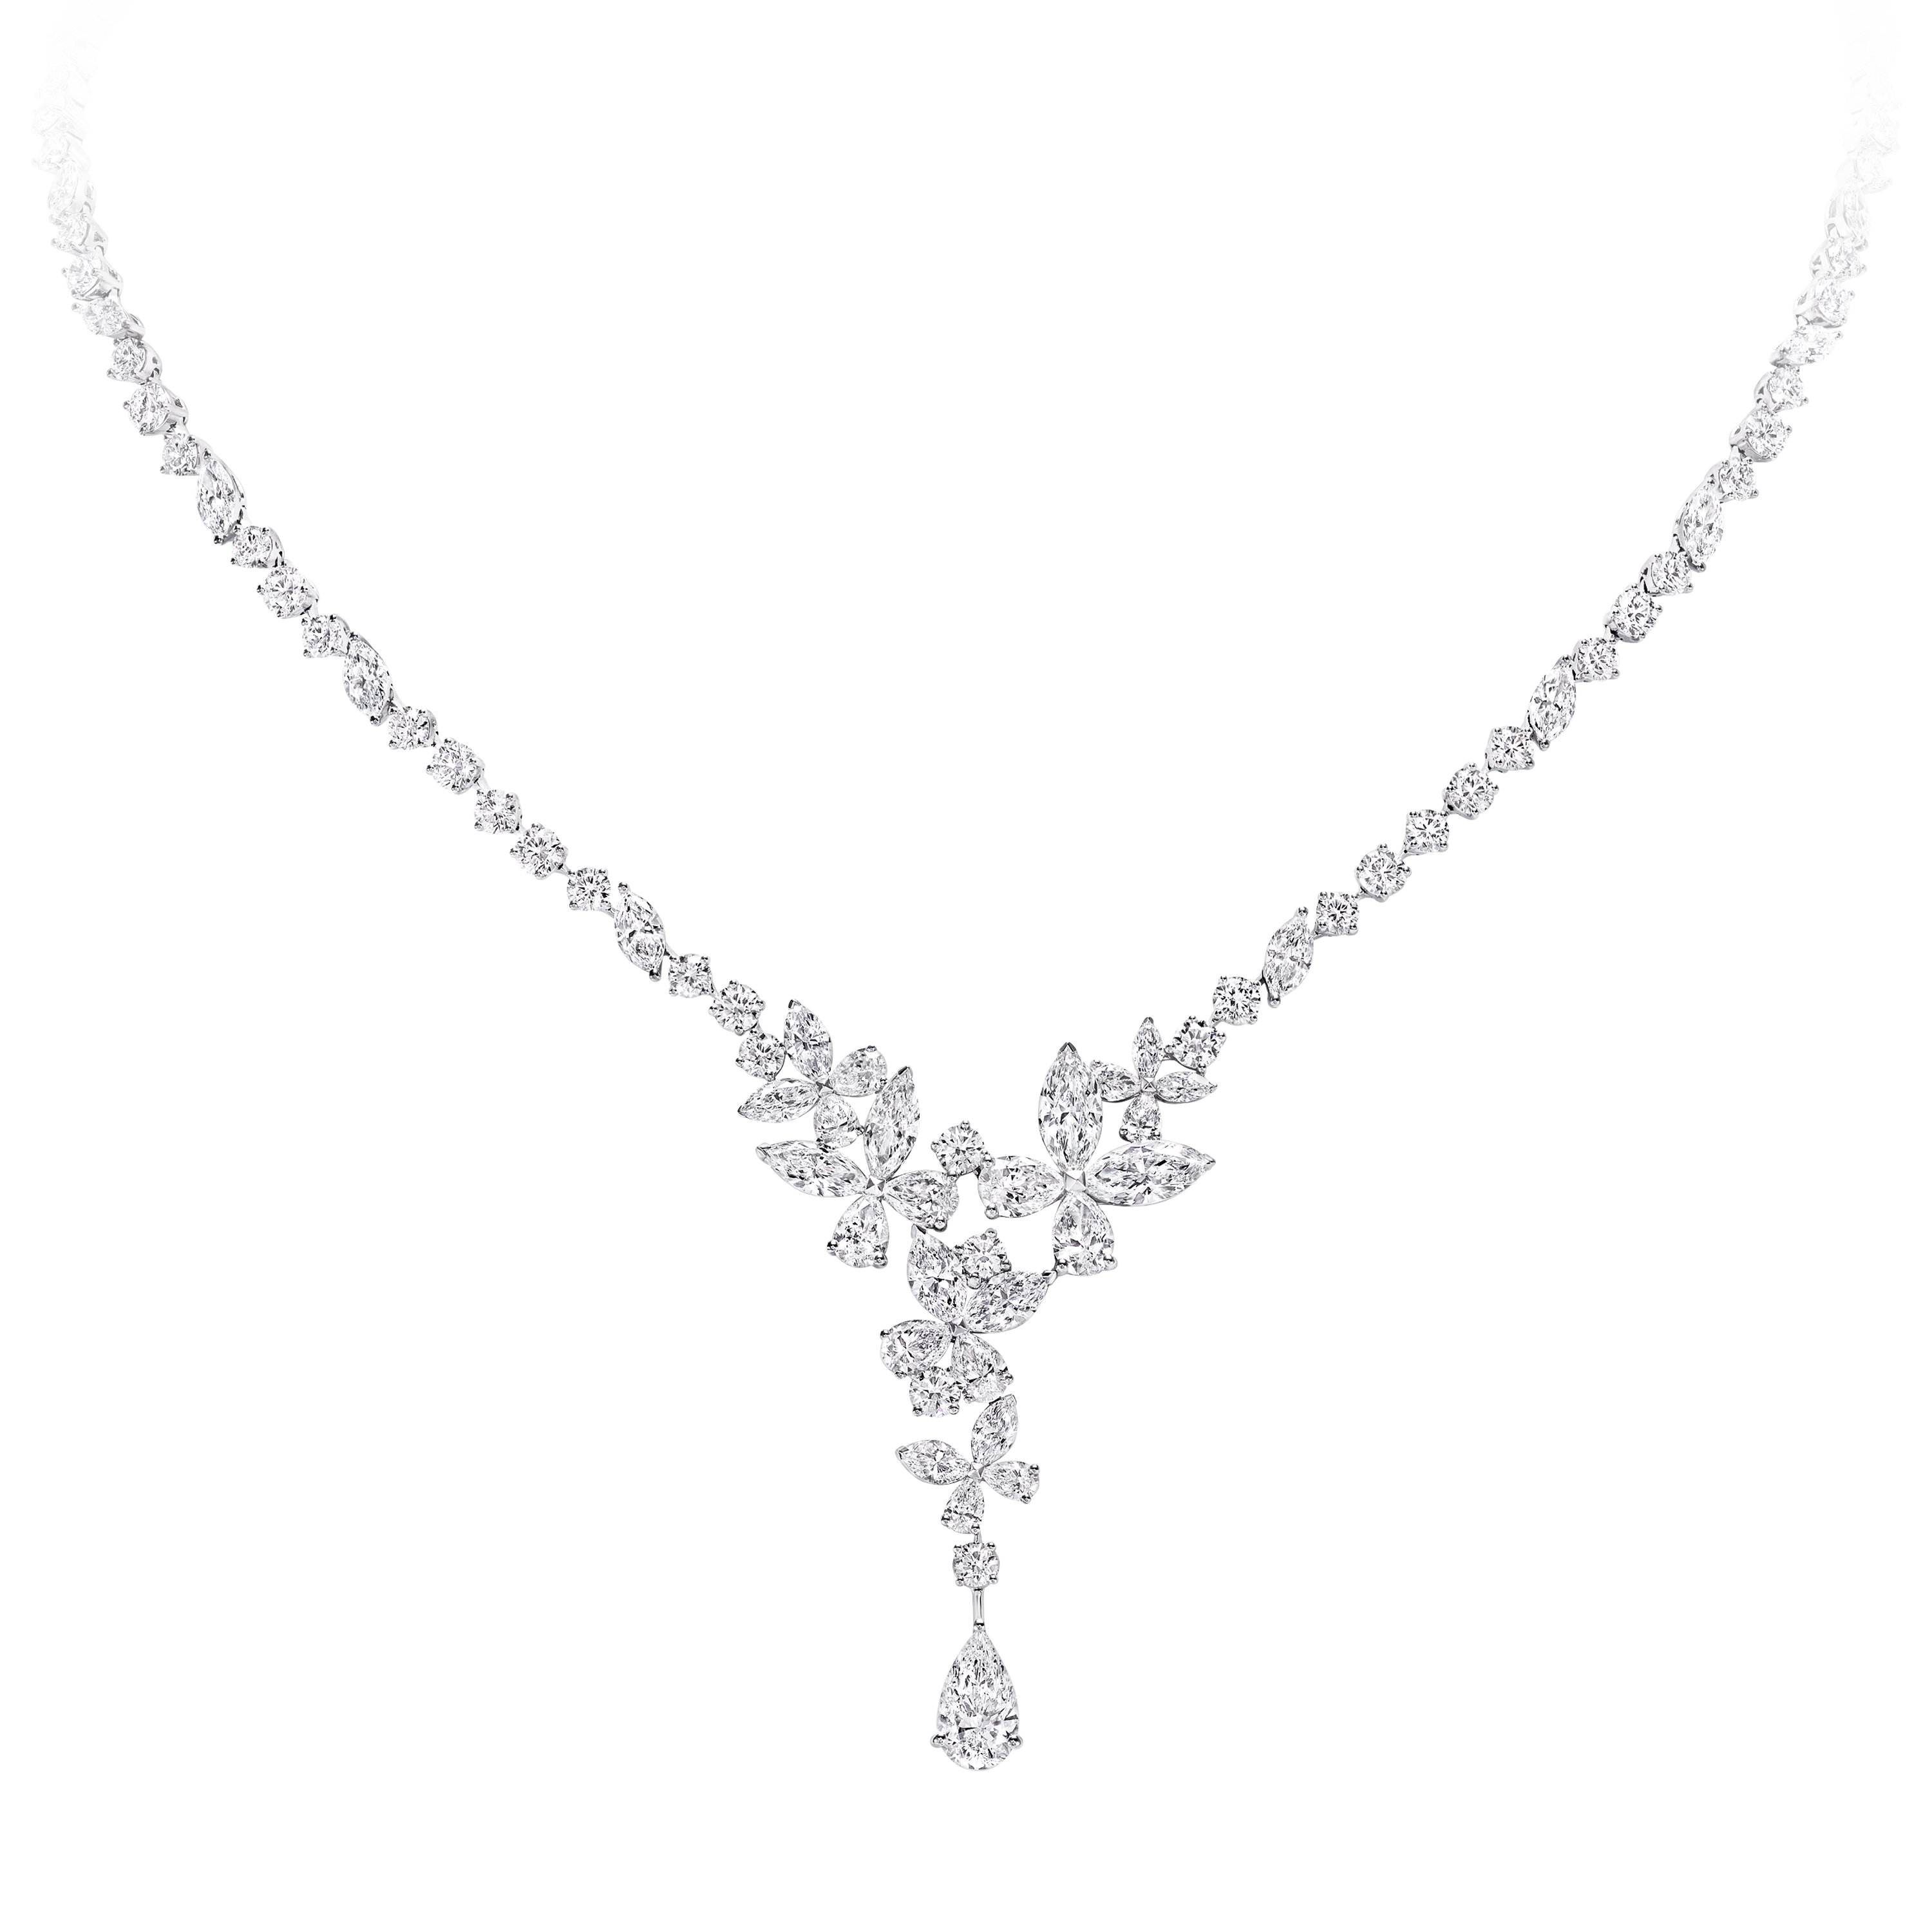 Classic Butterfly Diamond Necklace